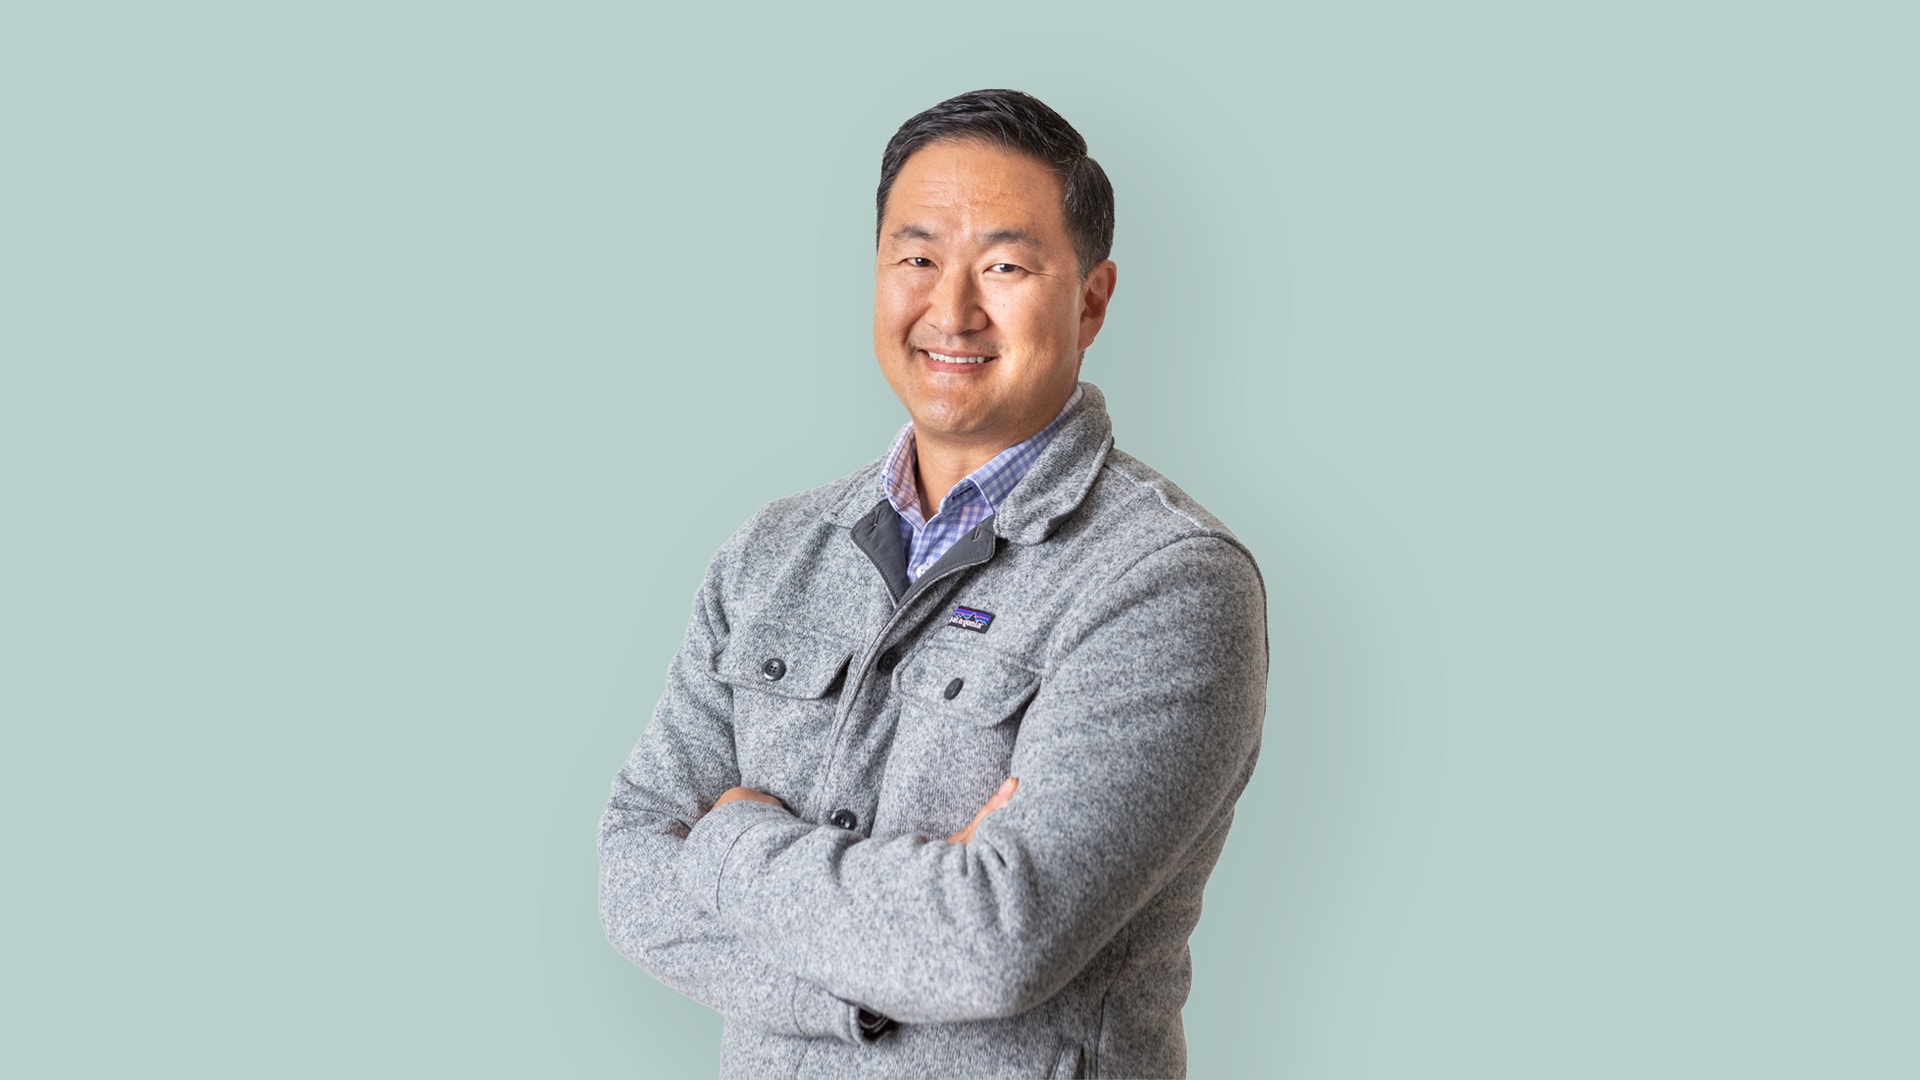 Michael Park, CMO at ServiceNow, on layoffs